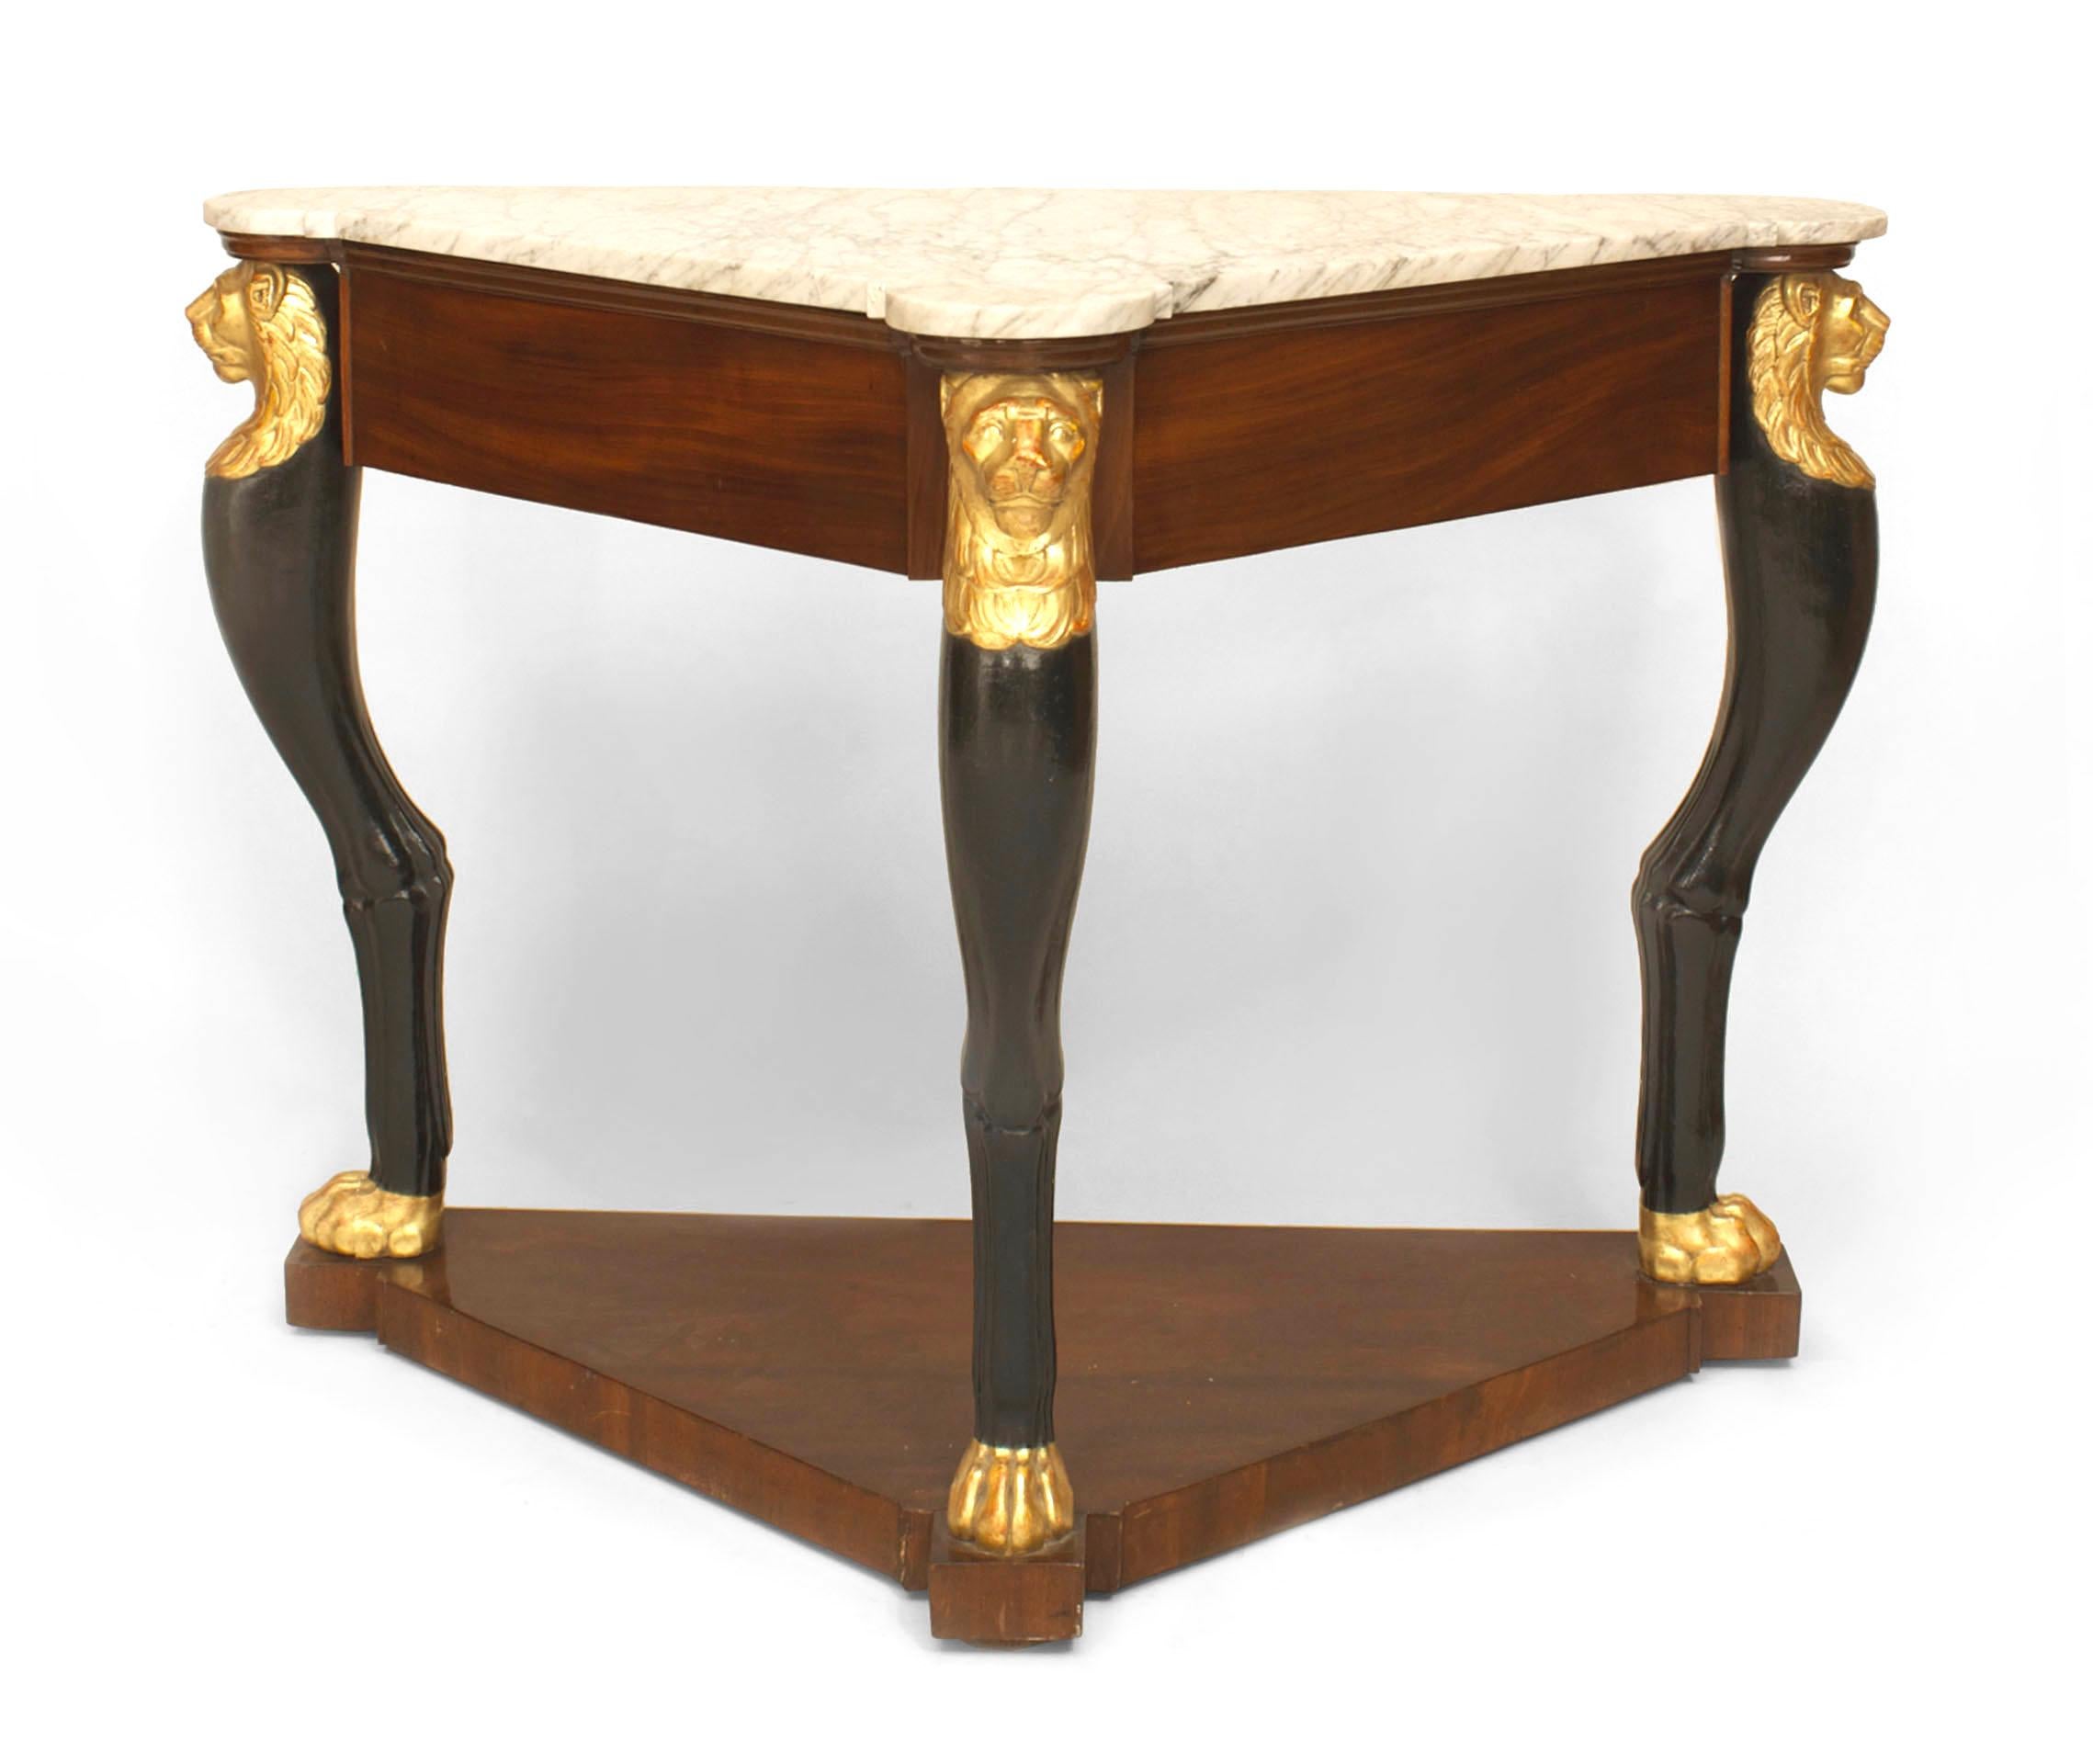 Marble A Fine French Empire Triangular Console Table with Gilt Lion Heads